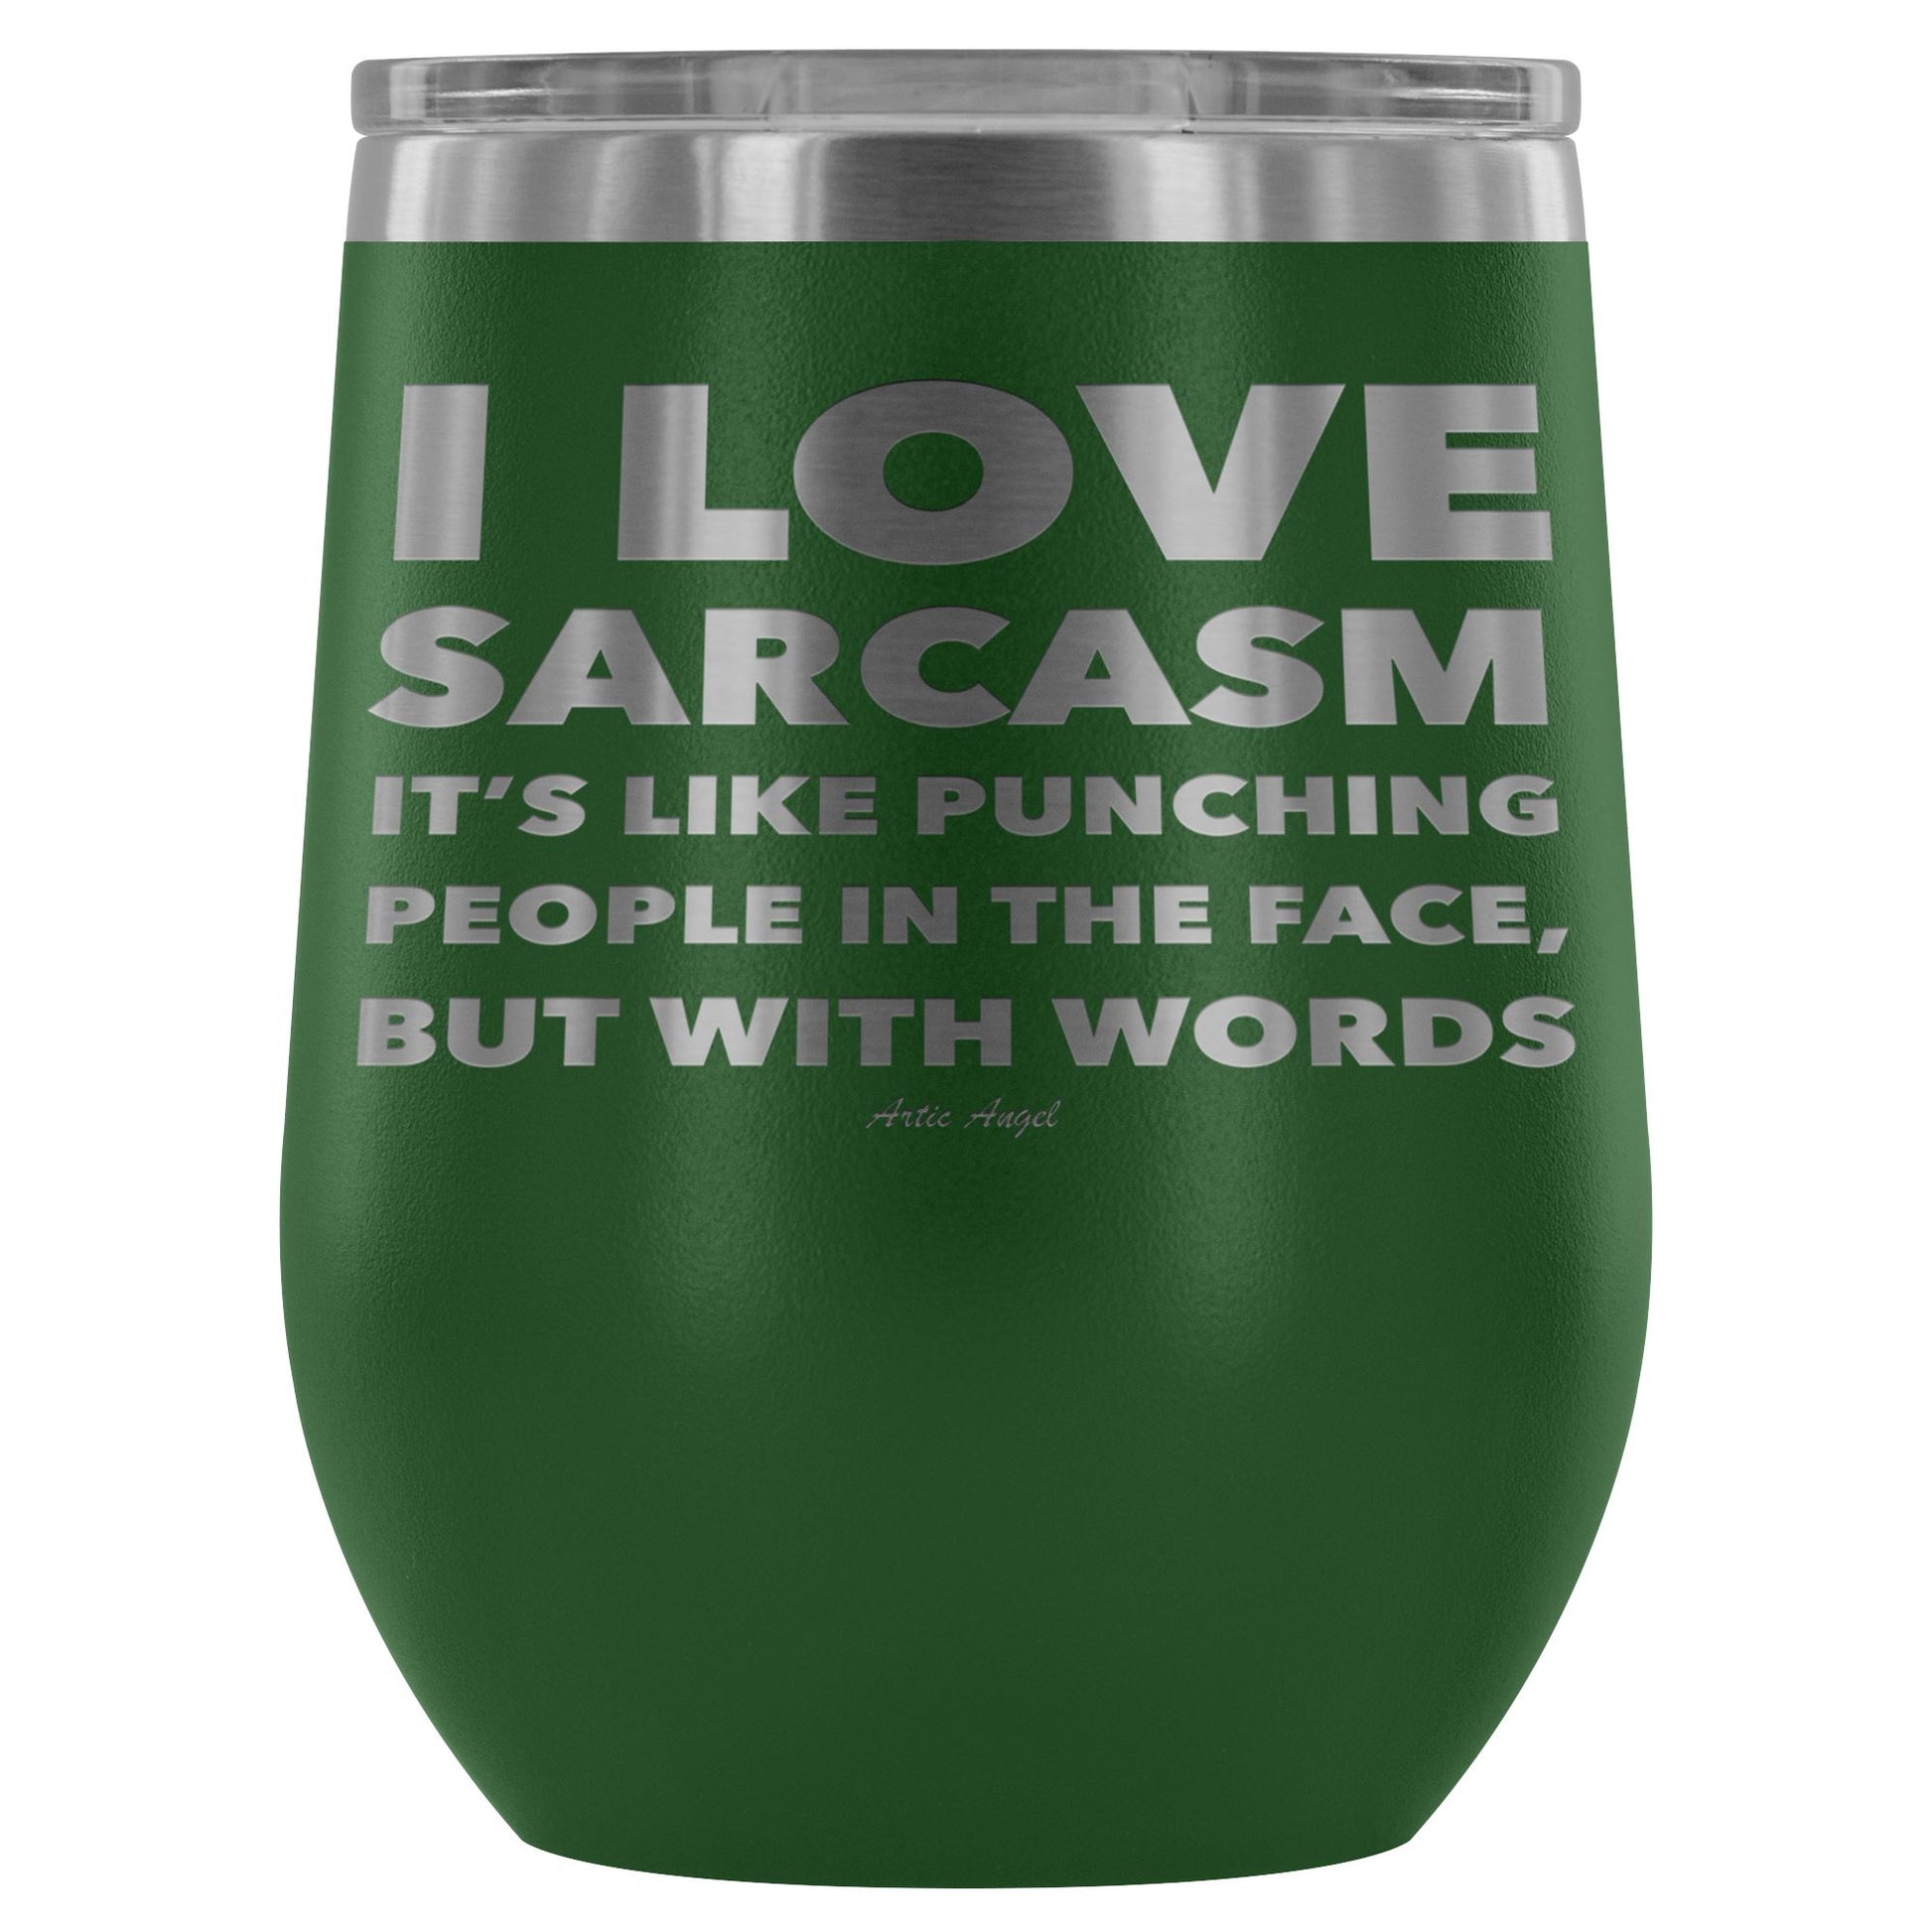 "I Love Sarcasm It's Like Punching People In The Face, But With Words" - Stemless Wine Cup Wine Tumbler Green 